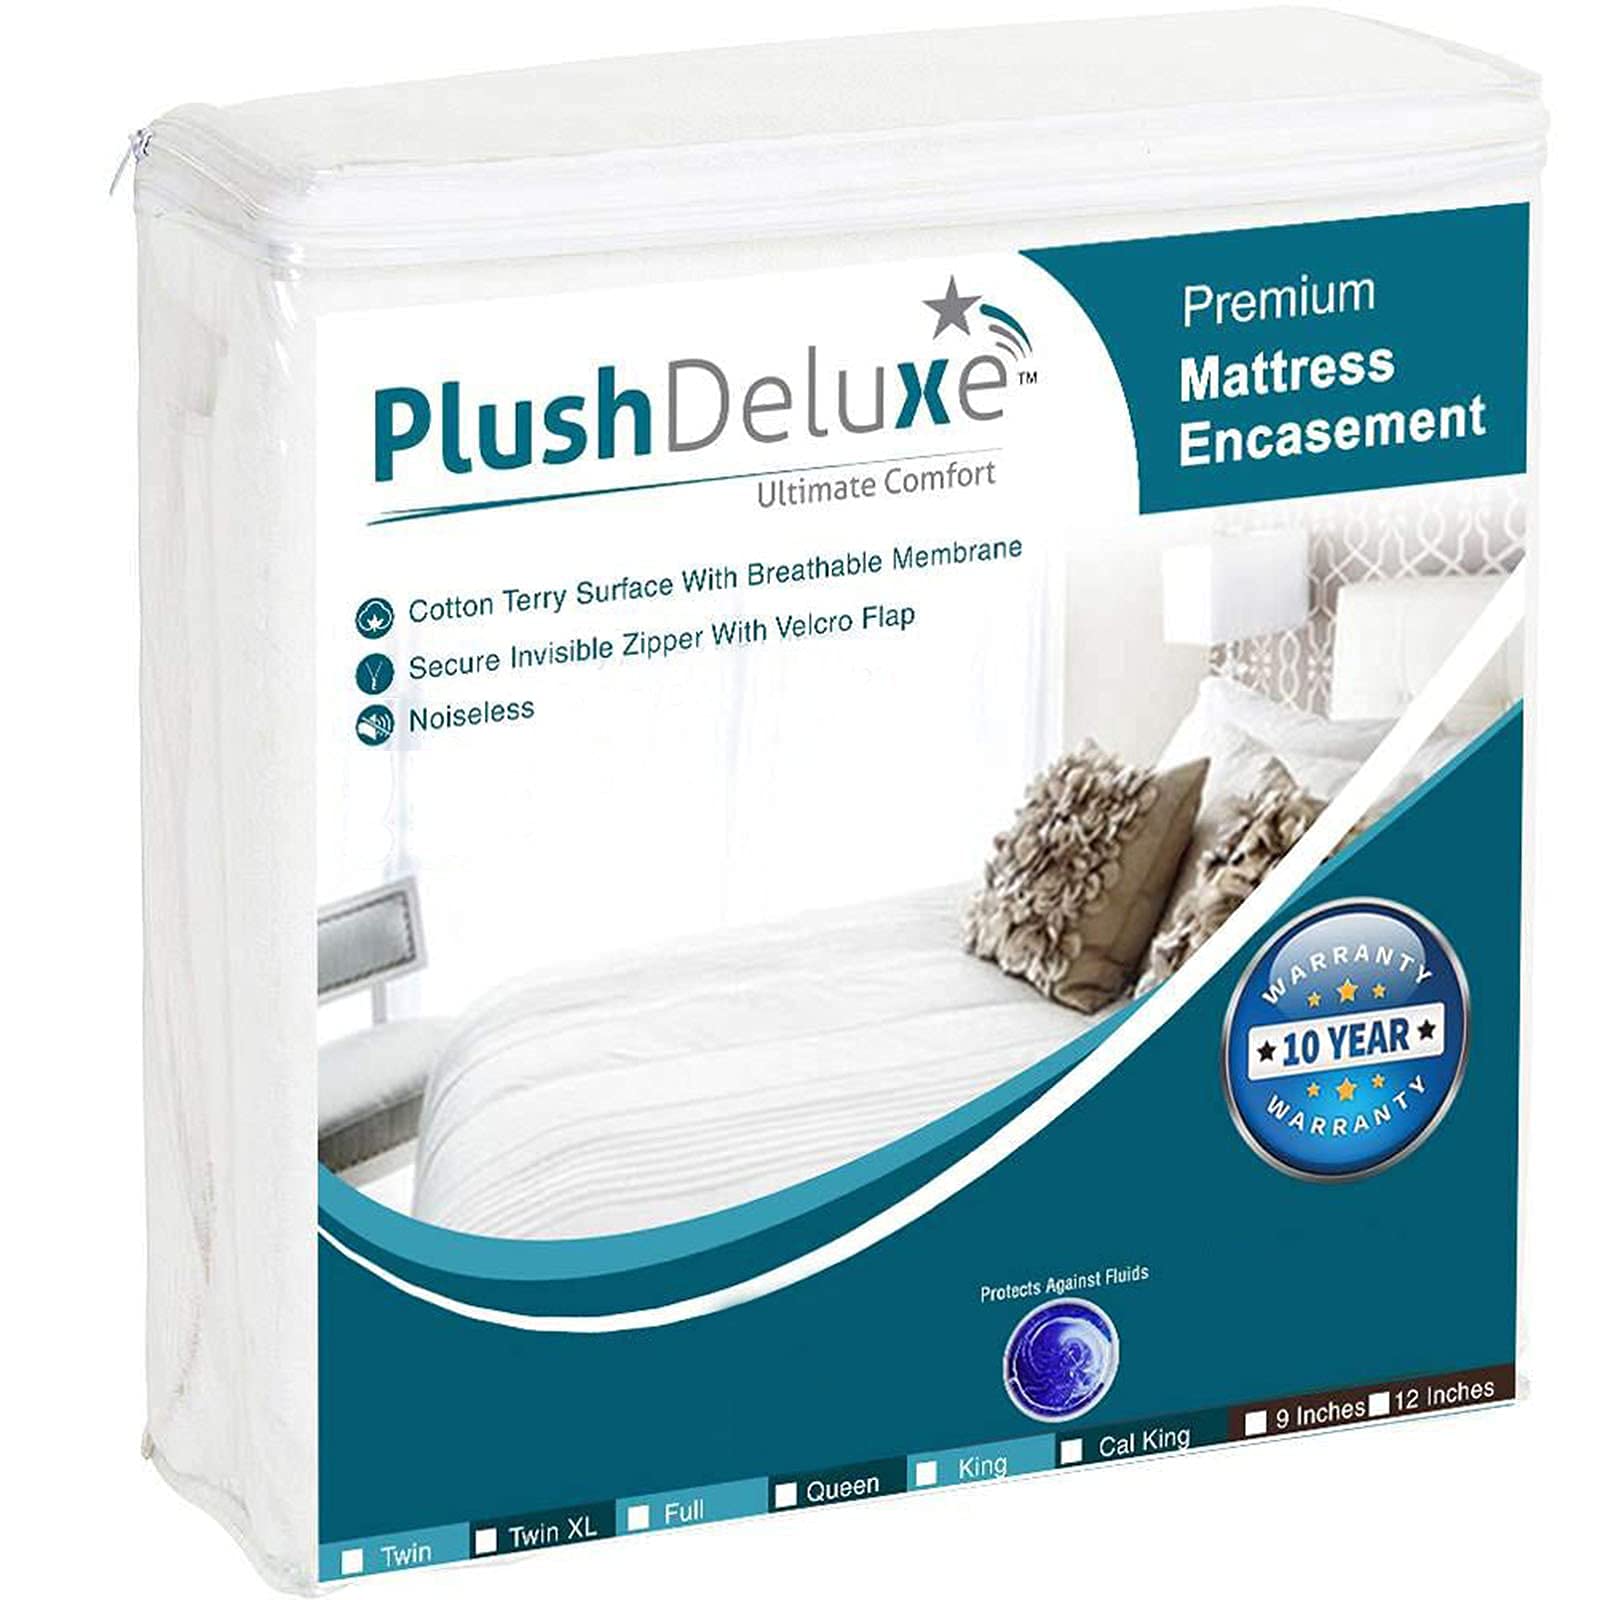 Book Cover PlushDeluxe Premium Mattress Encasement - Zippered Waterproof BedCover, 6-Sided Protection - Hypoallergenic Terry Fabric - Protects Against Dust, Critters - [12-15